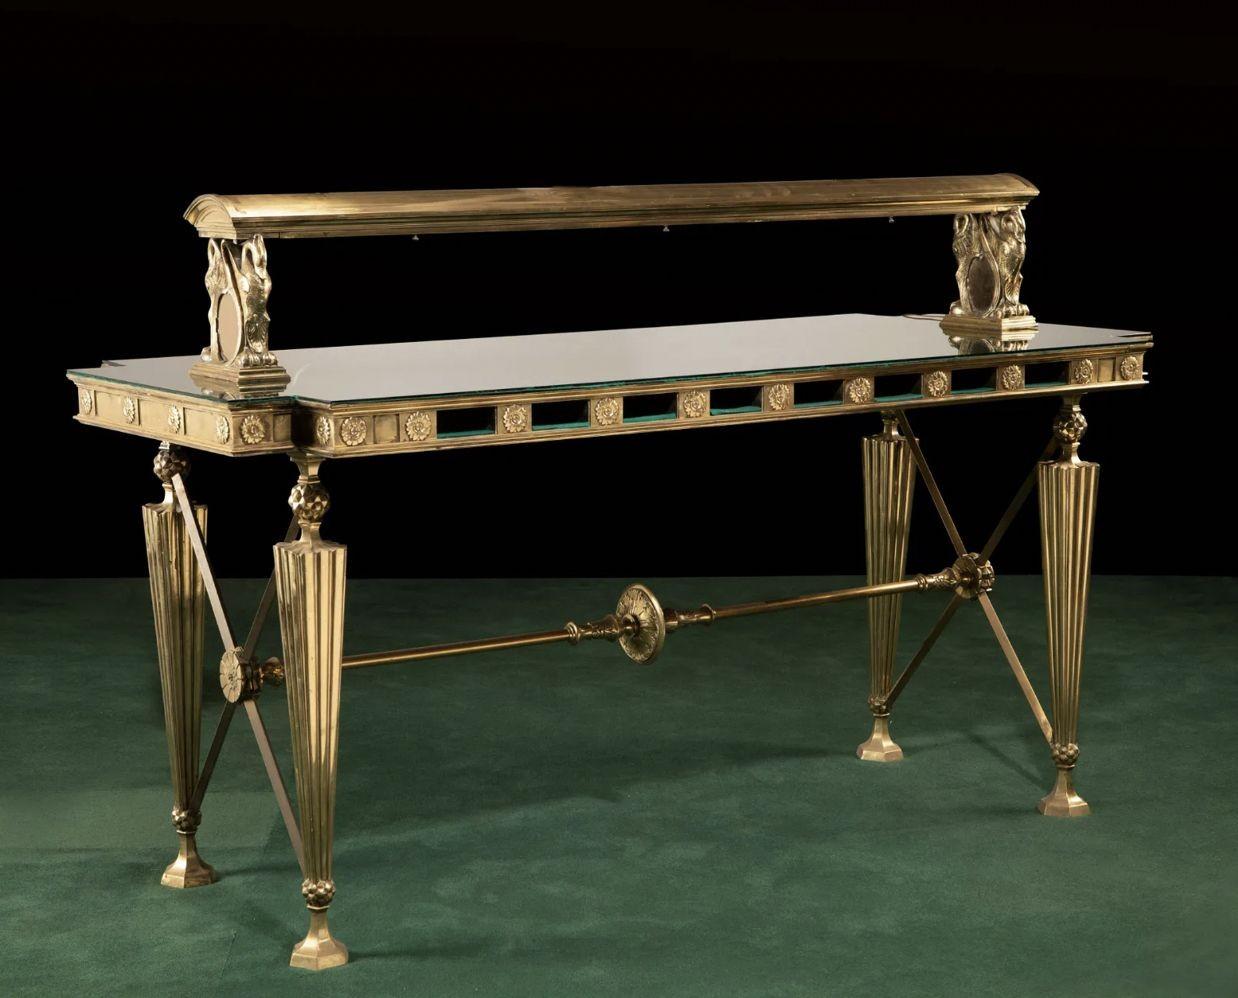 An American bronze and glass banking table
Early 19th century
Each Greco-Roman-style, the table with a rectangular notched-corner top with a medallion designed apron, four legs, cross members at each end, and a central support with center roundel,